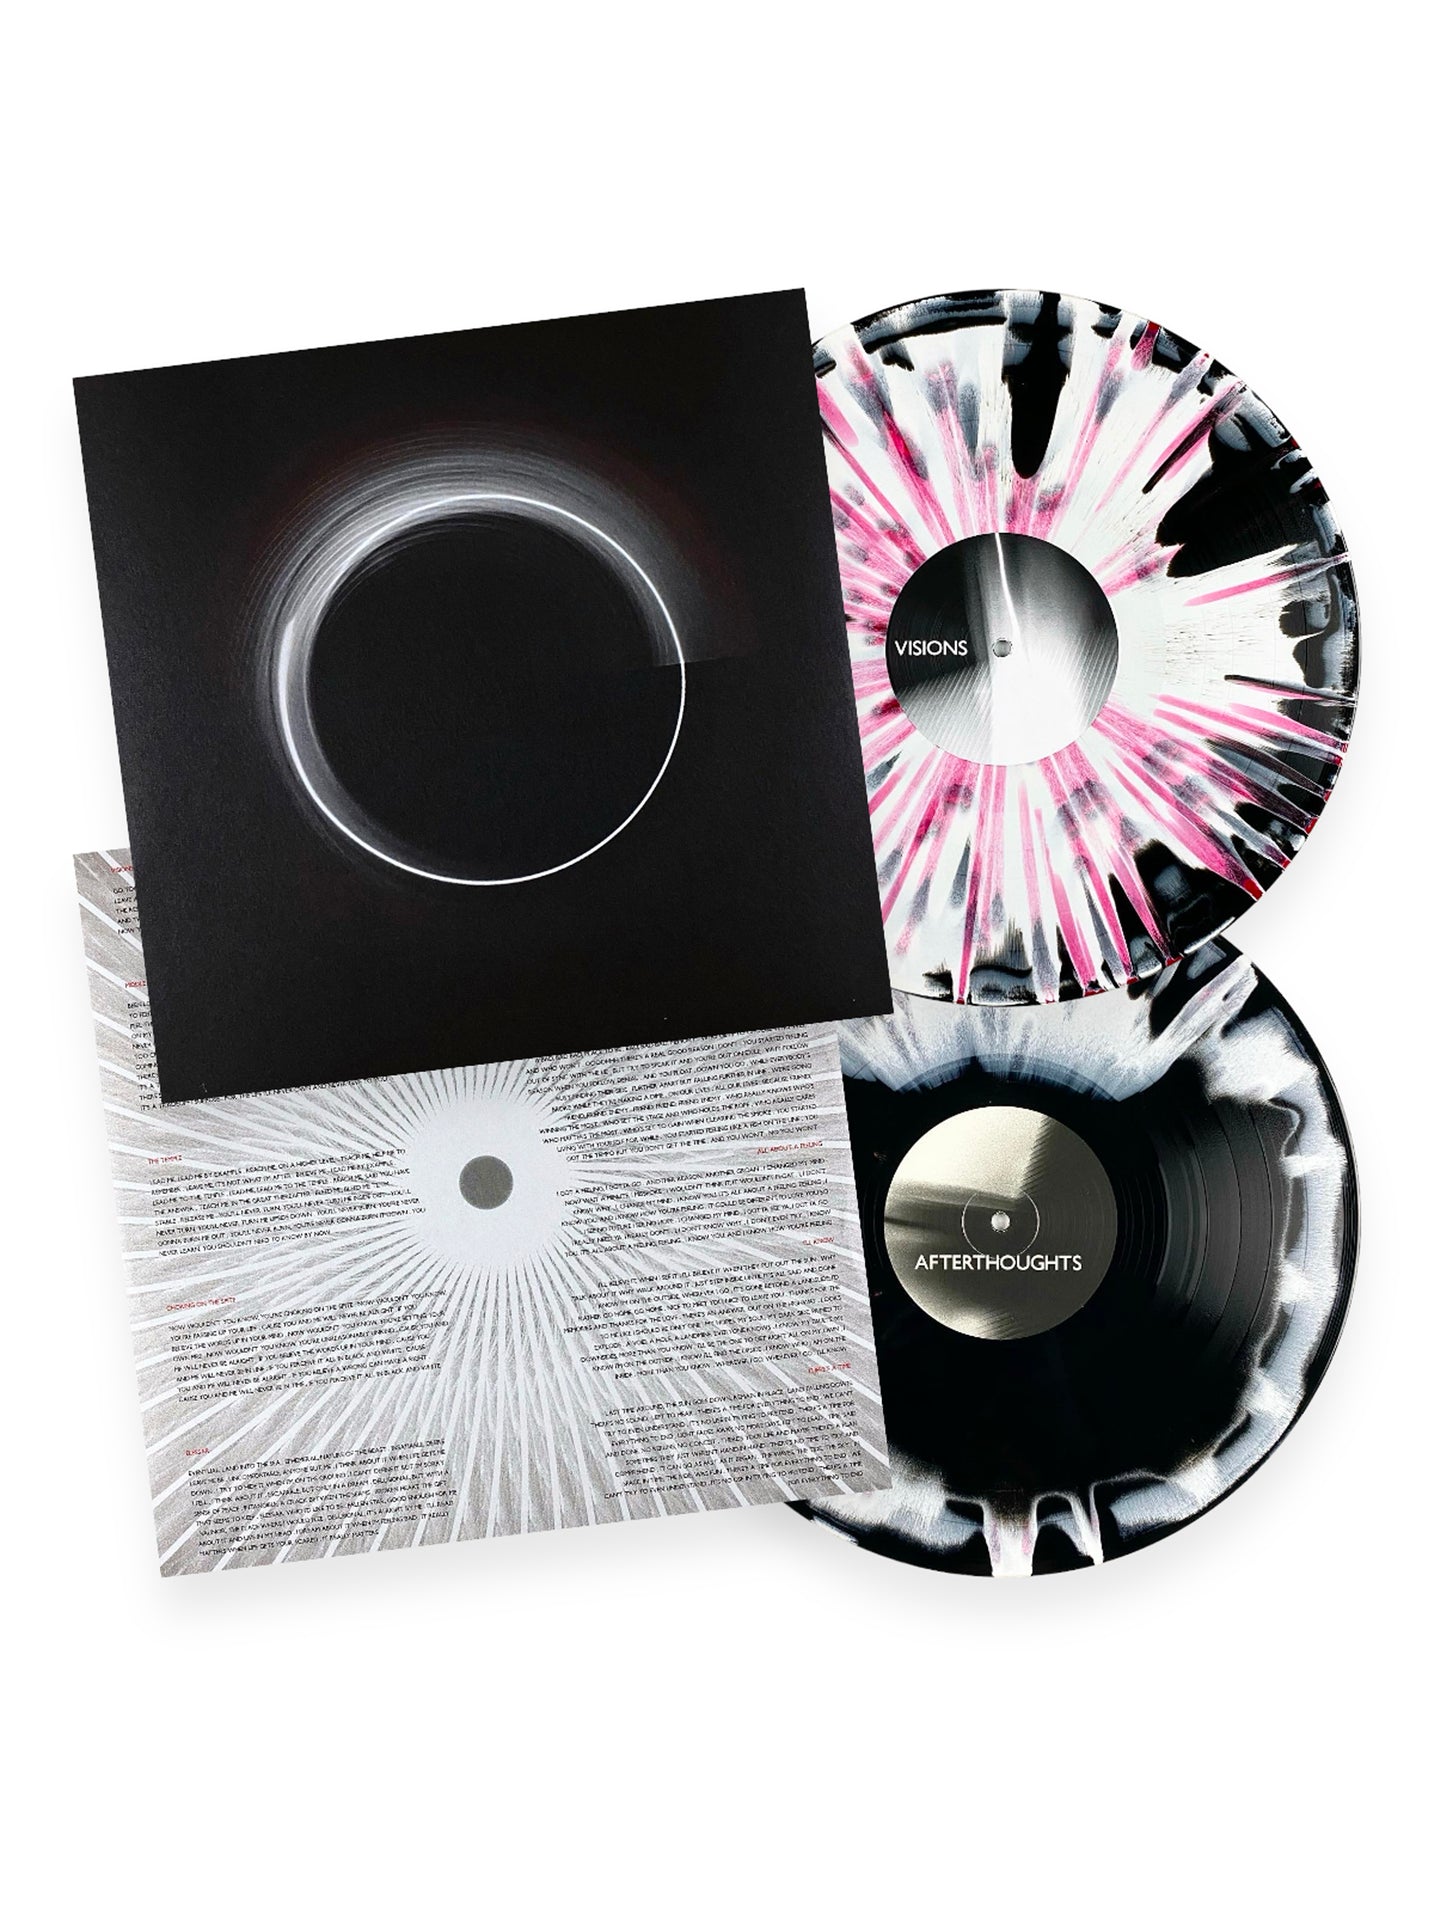 Red Vox -  Visions and Afterthoughts Vinyl